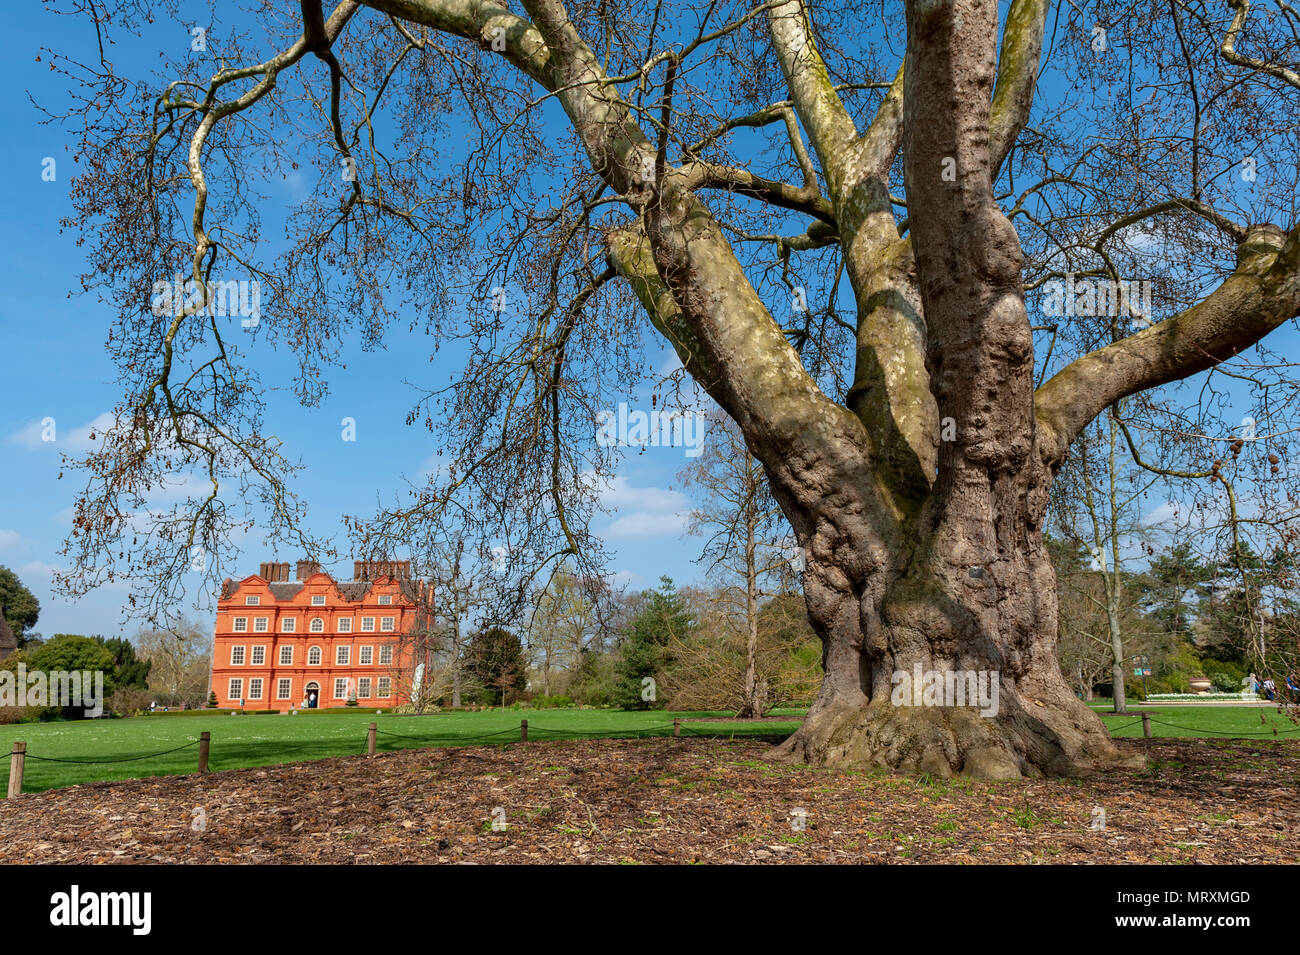 London, UK - April 2018: Oriental plane (Platanus orientalis), planted at Kew Gardens since 1762 and the Dutch House building of Kew Palace Stock Photo